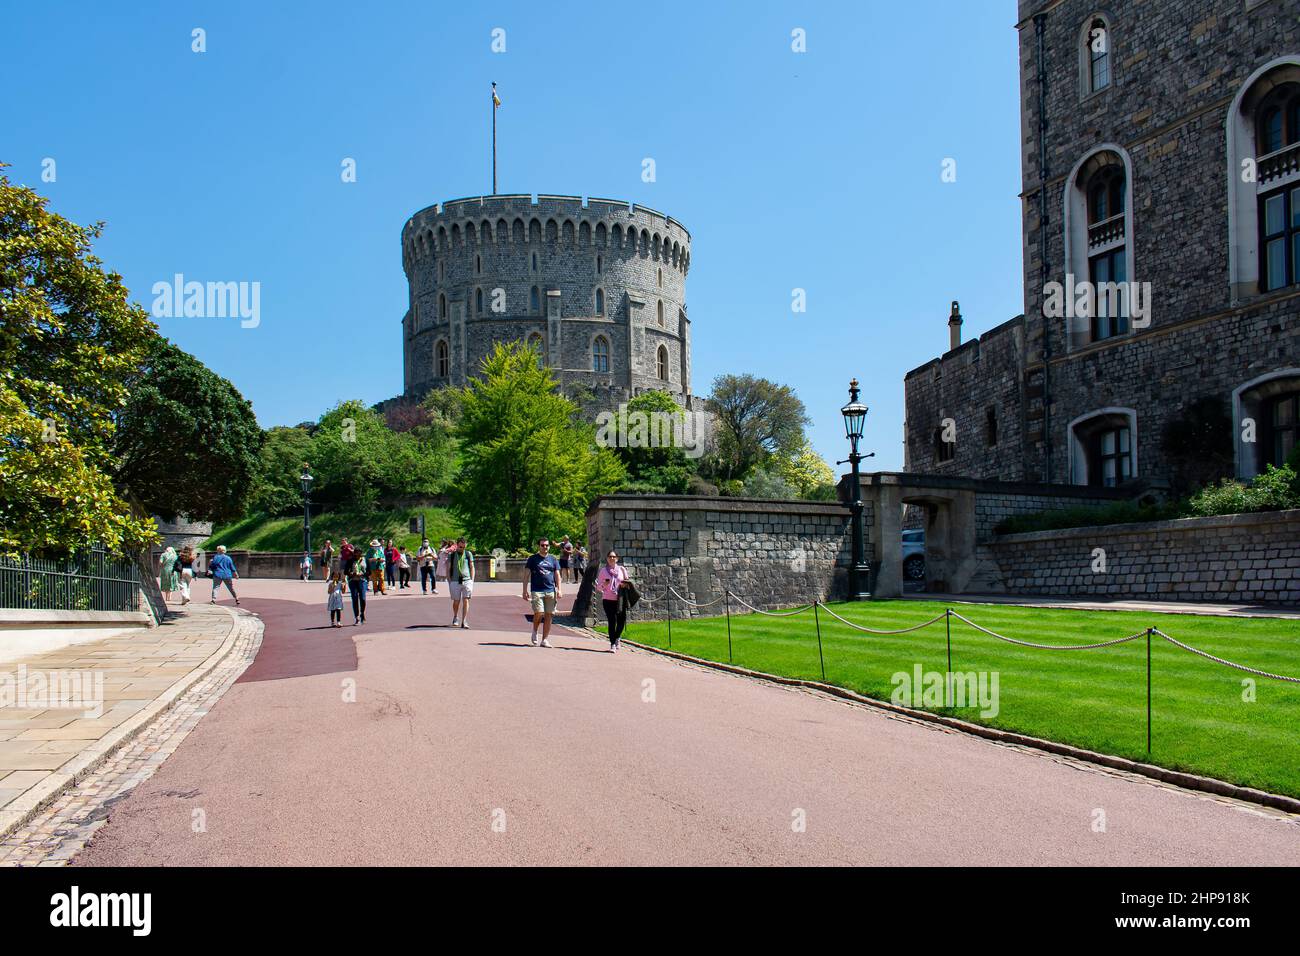 A pathway leads to the Round Tower of Windsor Castle.  A motte and bailey style fortification topped with a keep.  Windsor, Berkshire, England. Stock Photo